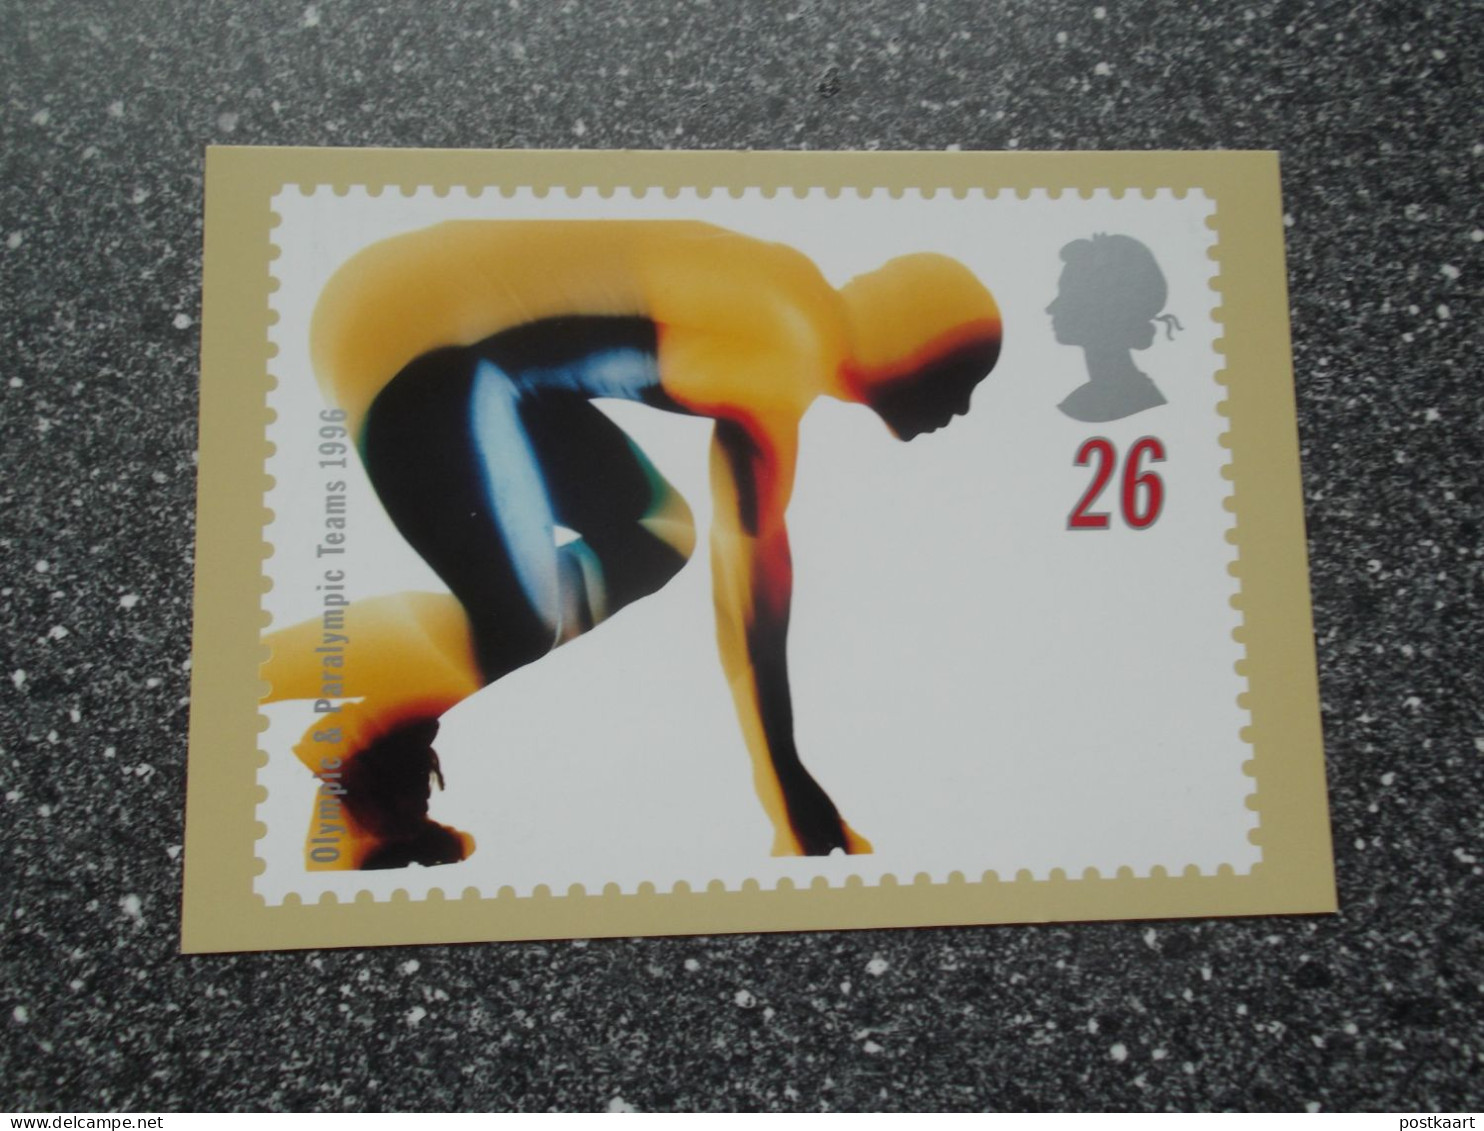 POSTCARD Stamp UK - Olympic & Paralympic Teams 1996 - 26 - Stamps (pictures)